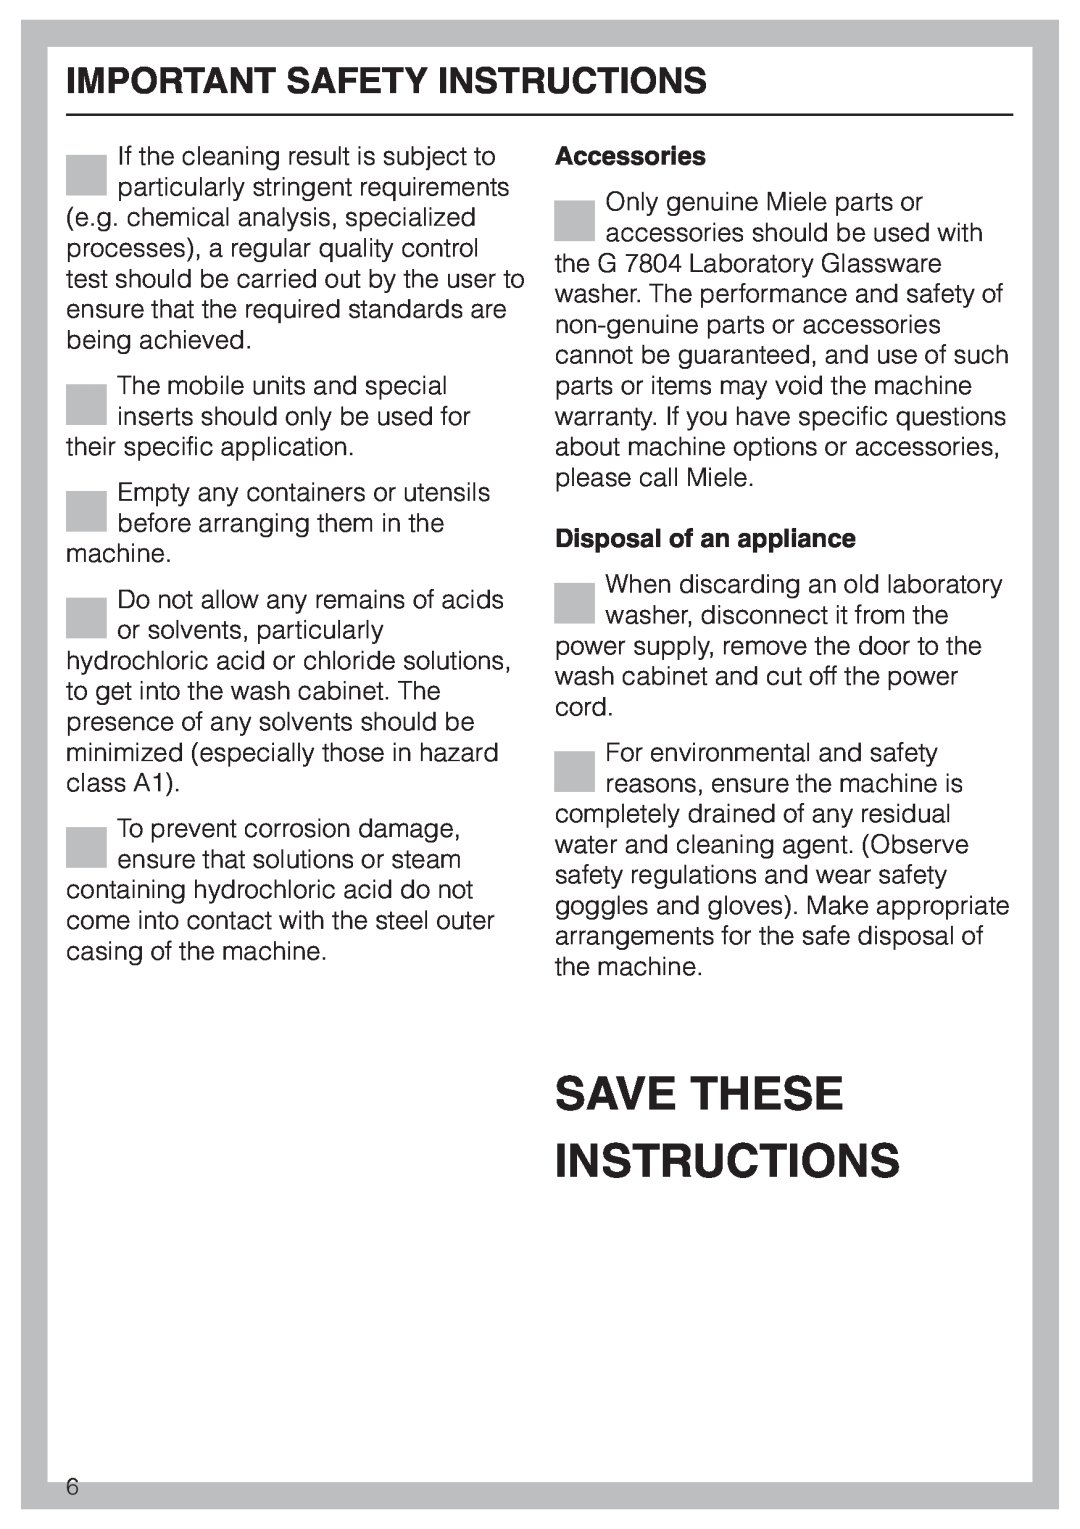 Miele G 7804 Save These Instructions, Important Safety Instructions, Accessories, Disposal of an appliance 